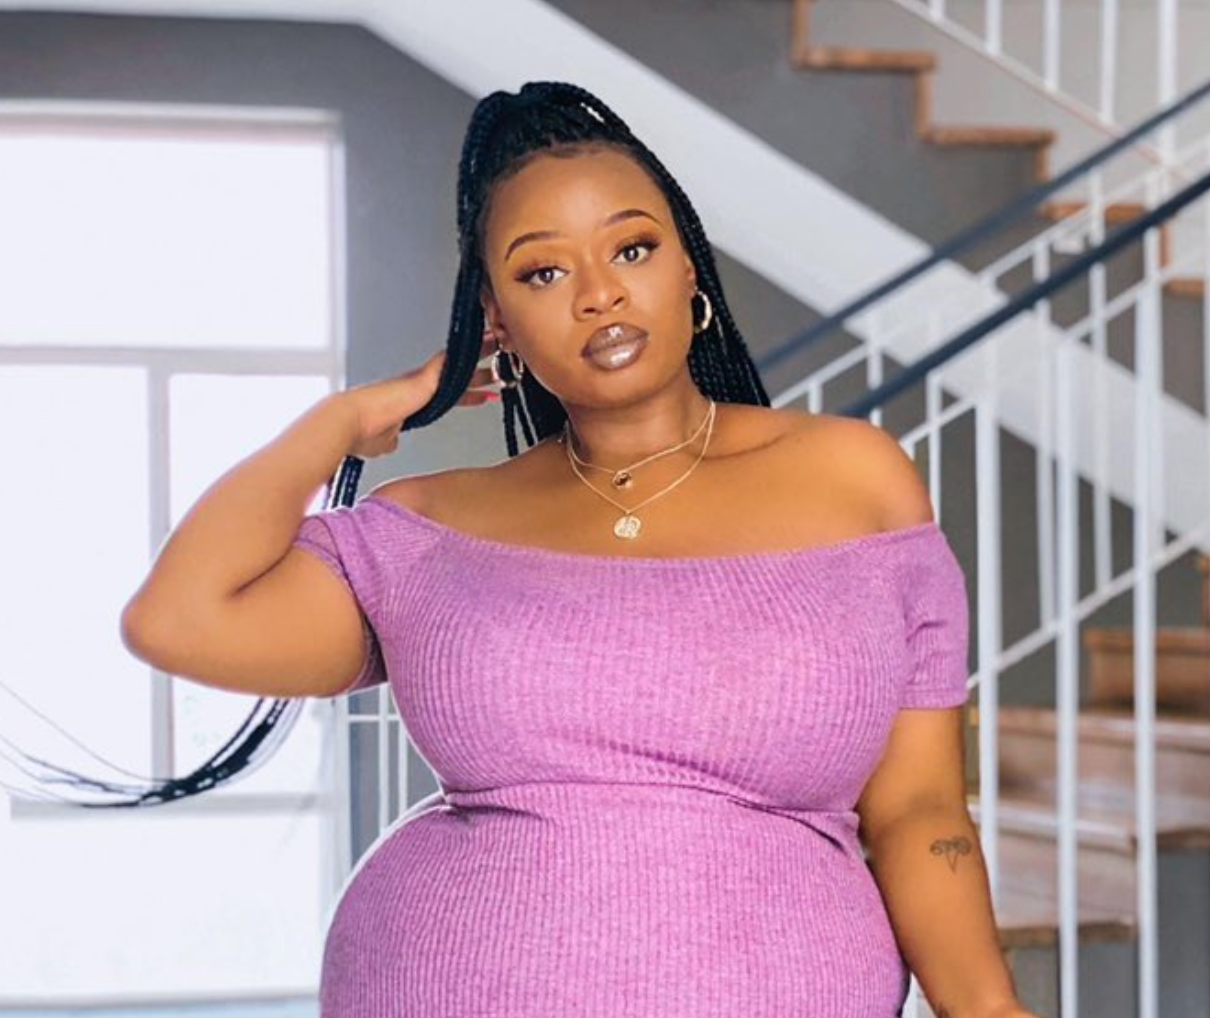 Thickleeyonce Educates Social Media On How To Live Their Best Lives